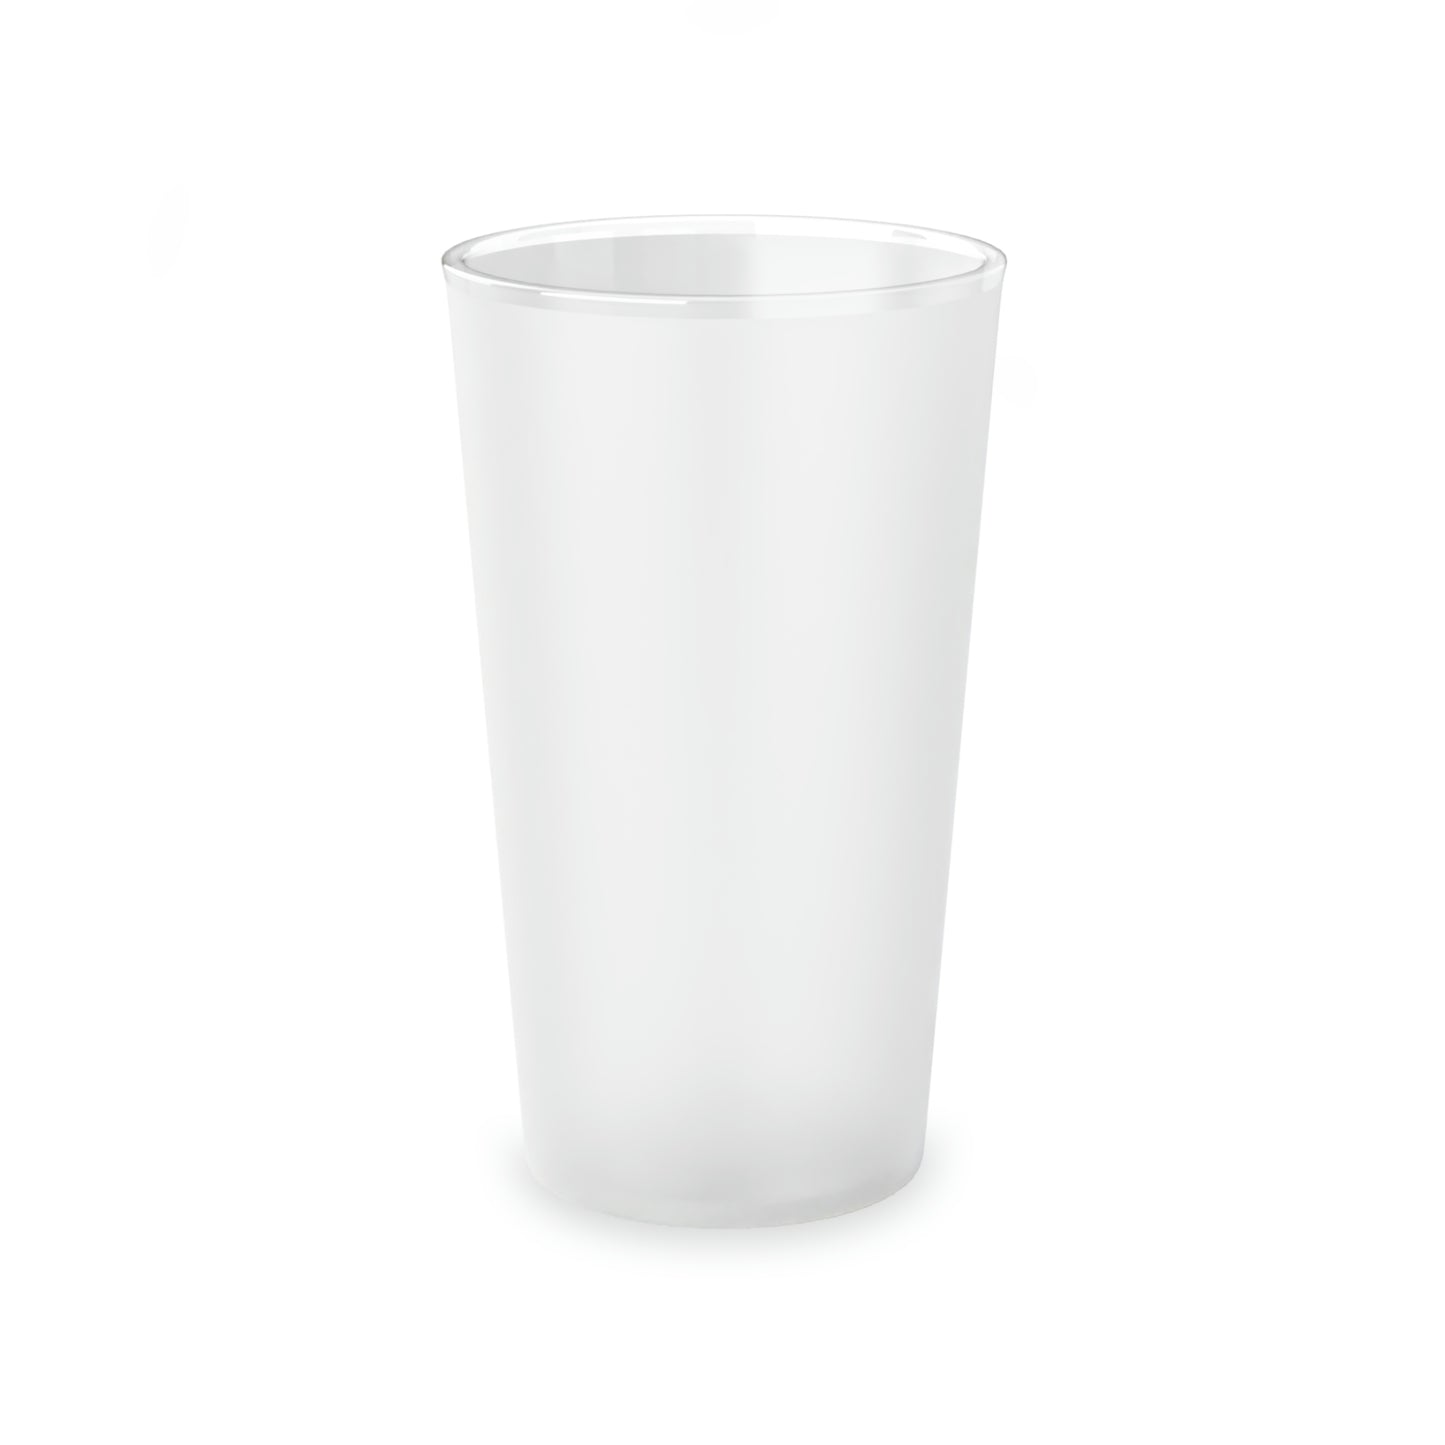 Enid - Frosted Pint Glass